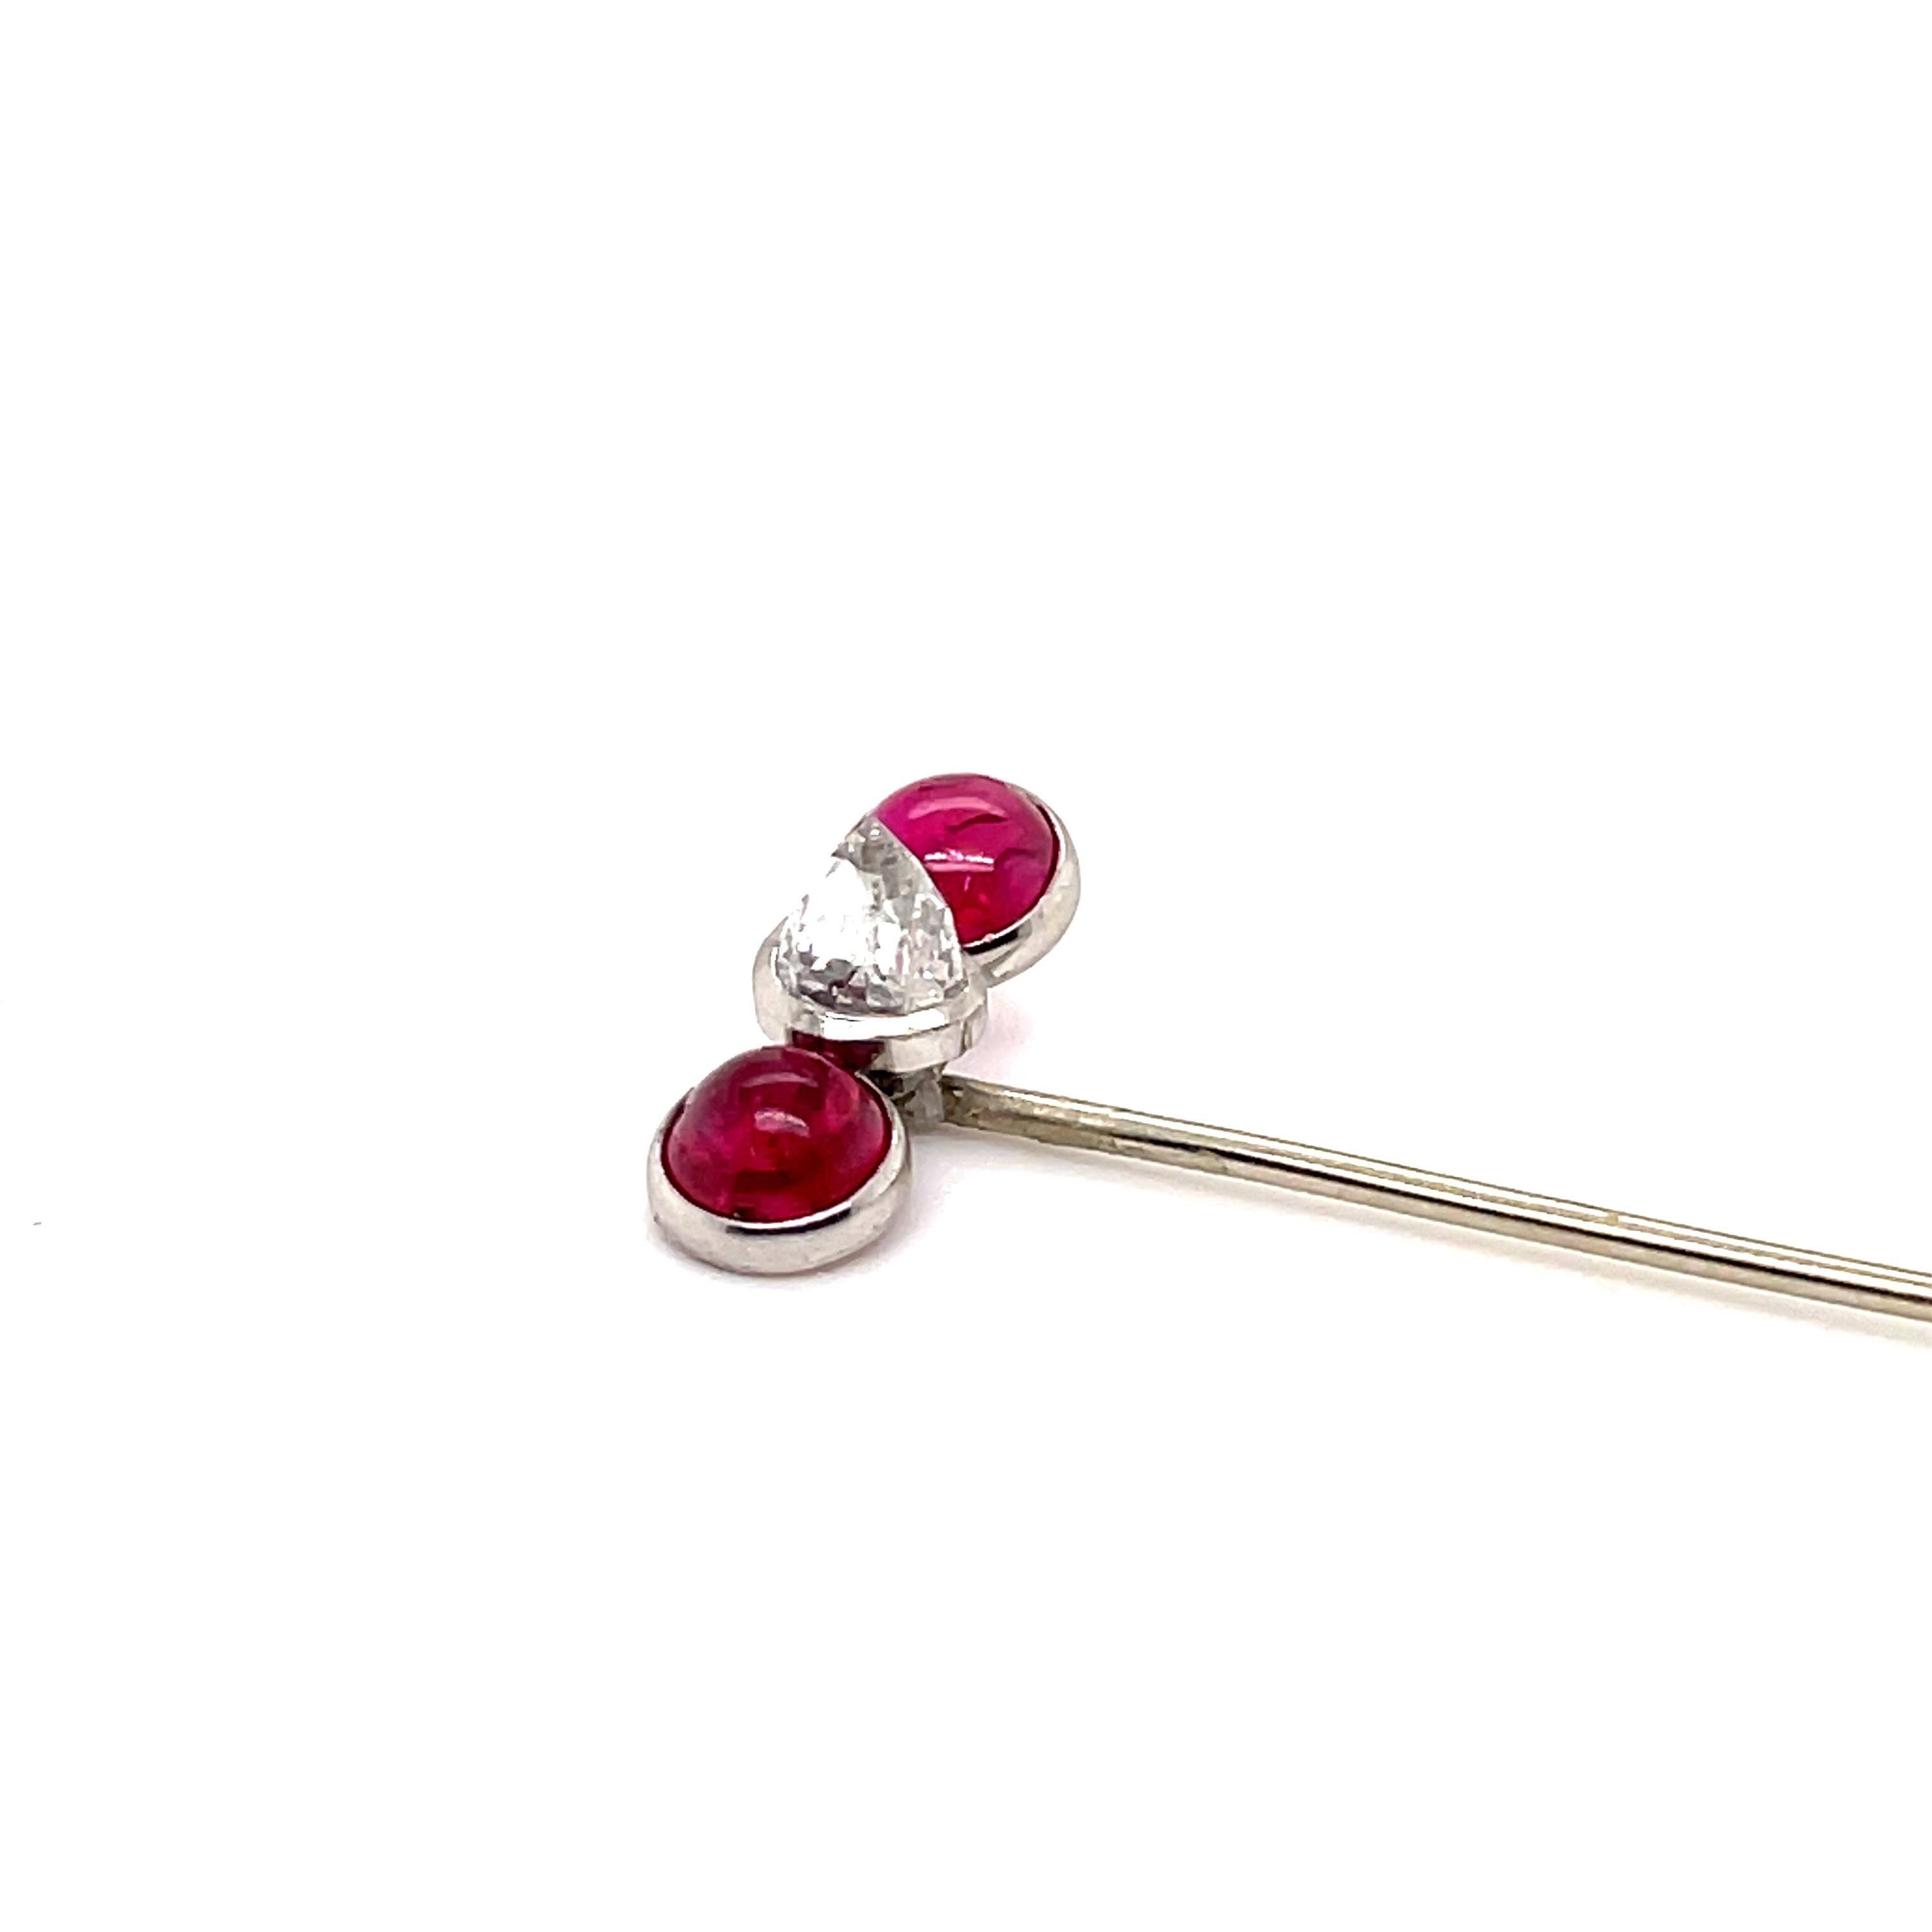 Art Deco Ruby Cabochon and Pyramid Diamond Tie Pin, ca. 1930s

An elegant French Art Deco pin set with two bright natural Burmese ruby cabochons (ca. 1 carats) and centring an unusual high domed pyramid shaped diamond (ca. 0.8 carats).

French